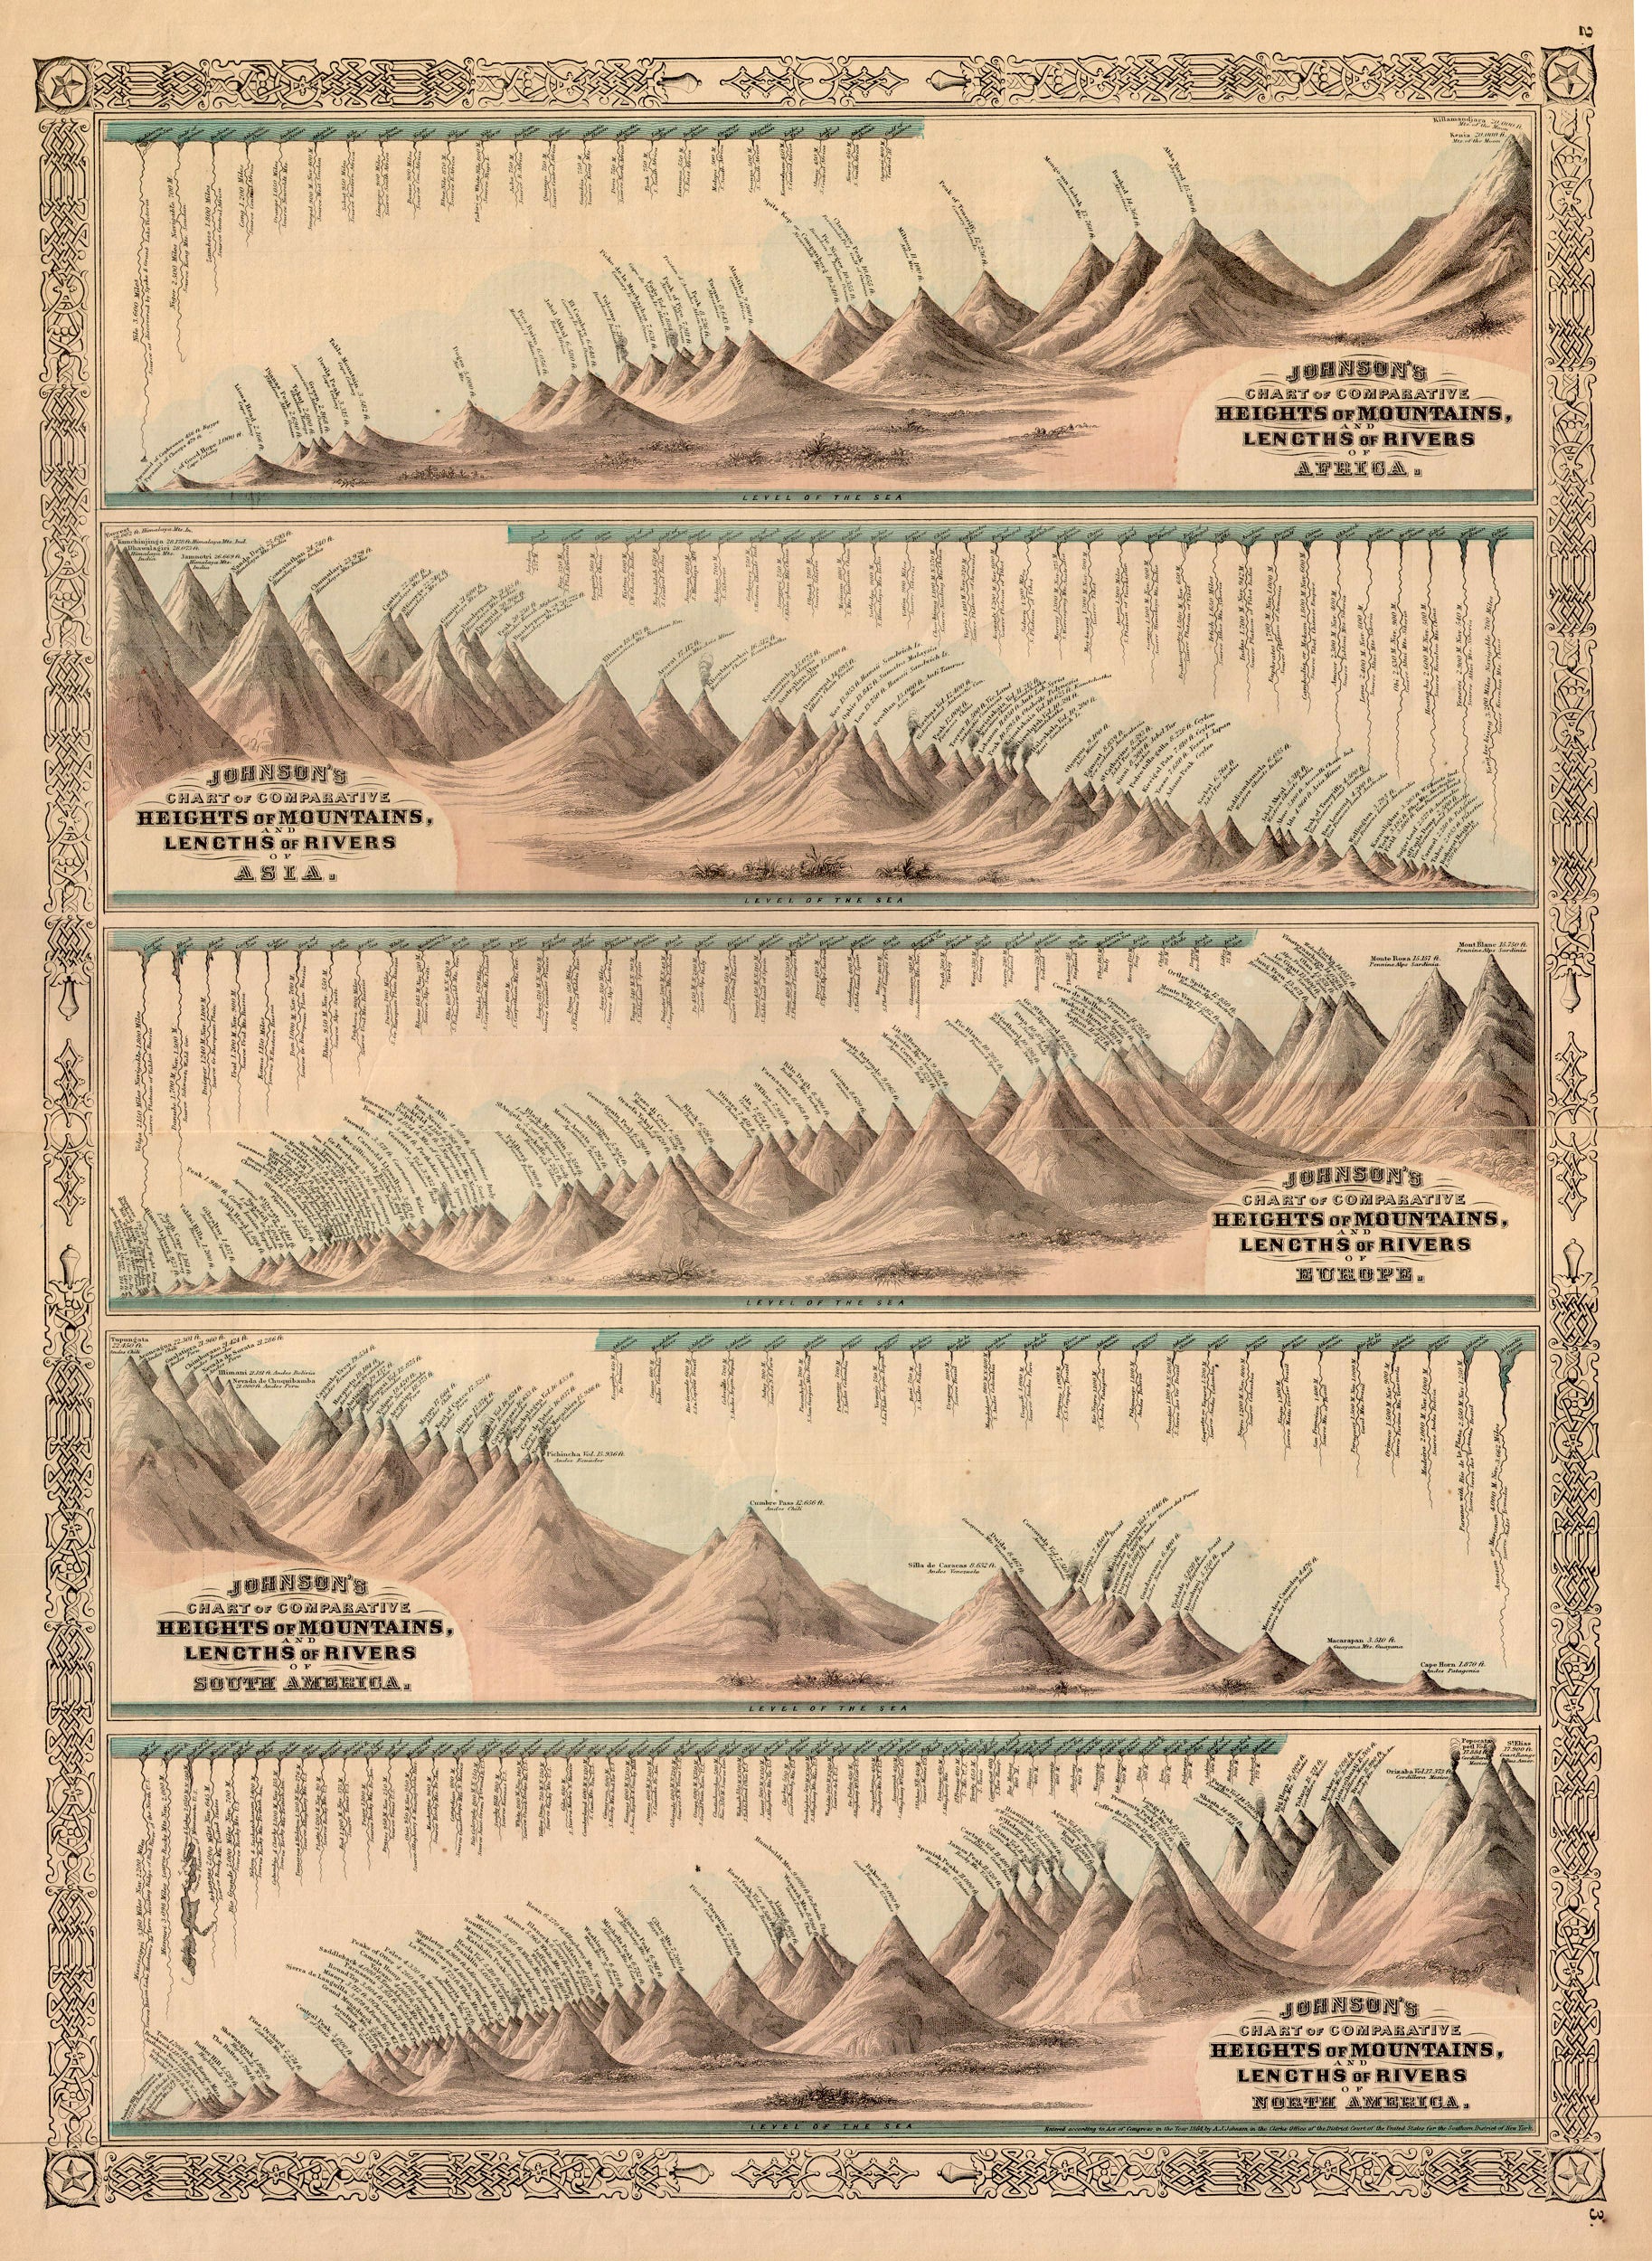 (Thematic) Johnson's Chart of Comparative Heights of Mountains, and Lengths of Rivers...